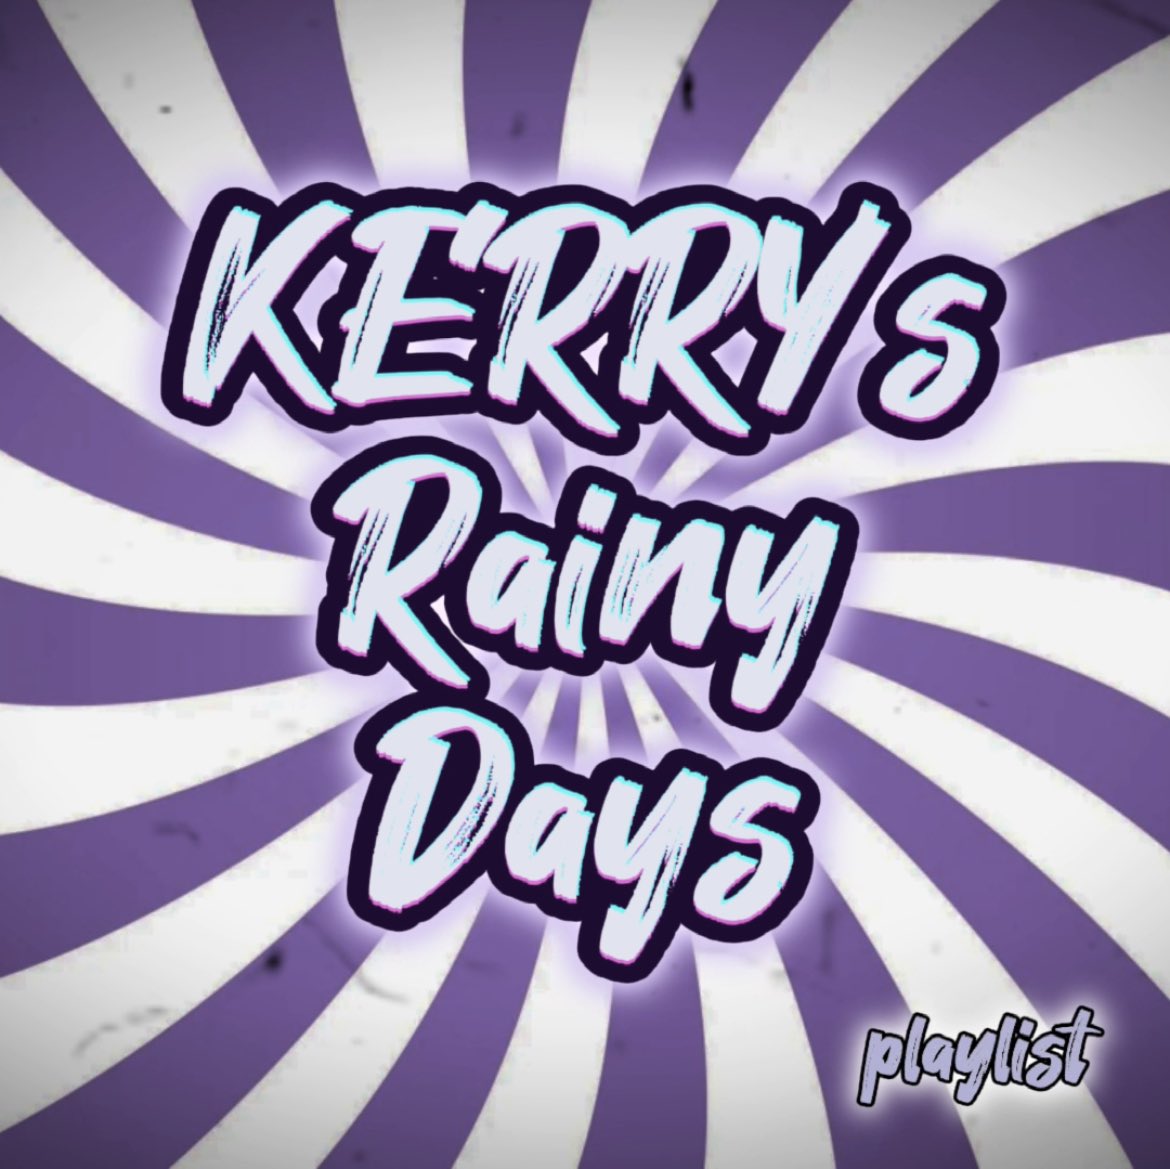 Today I'm saying goodbye to the gloomy weather by listening to my “KERRY's Rainy Days” playlist. ☔️☔️☔️ Give it a spin, support awesome musicians: @ikingofbass @firehillmusic @ThePaulLawrenc1 @SilverbirdRock open.spotify.com/playlist/6Xdy0… #playlist #playlistcurator #spotifyplaylist